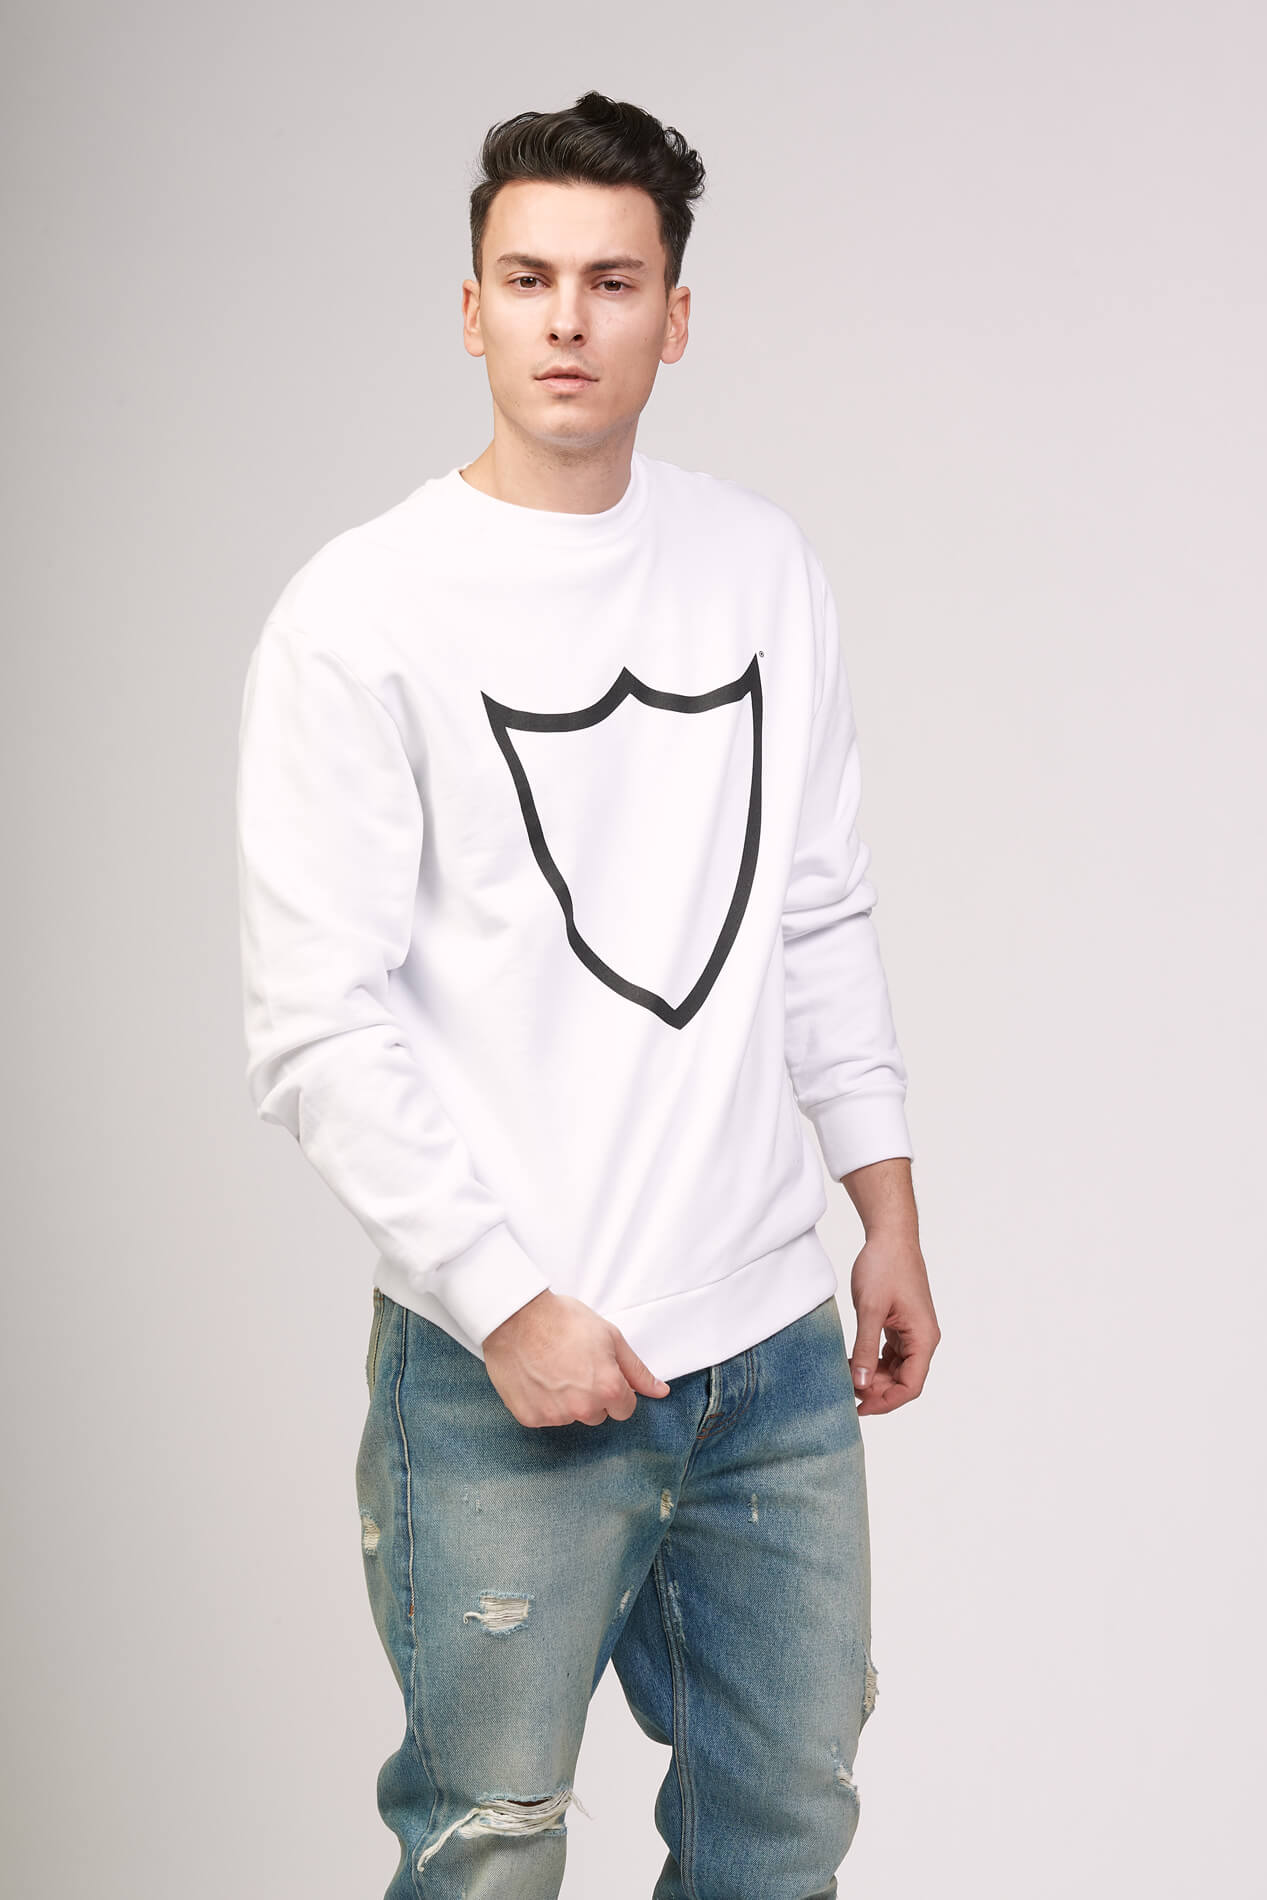 SHIELD SWEATER Round neck sweater with printed logo on the front. 100% cotton. Made in Italy. HTC LOS ANGELES